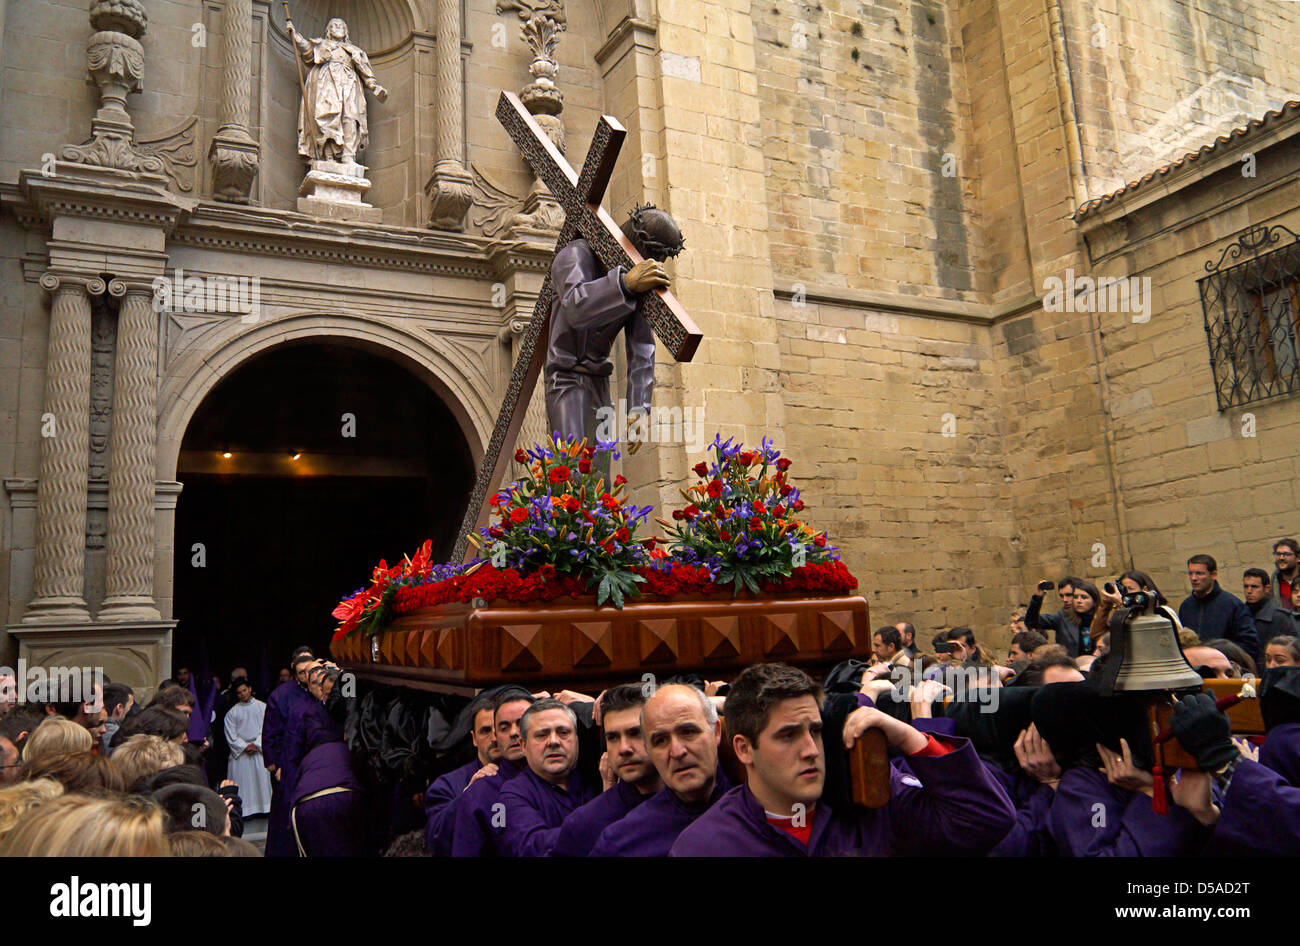 Easter Pagent in logroño Northern Spain, on the camino De Santiago de Compostela route. Stock Photo